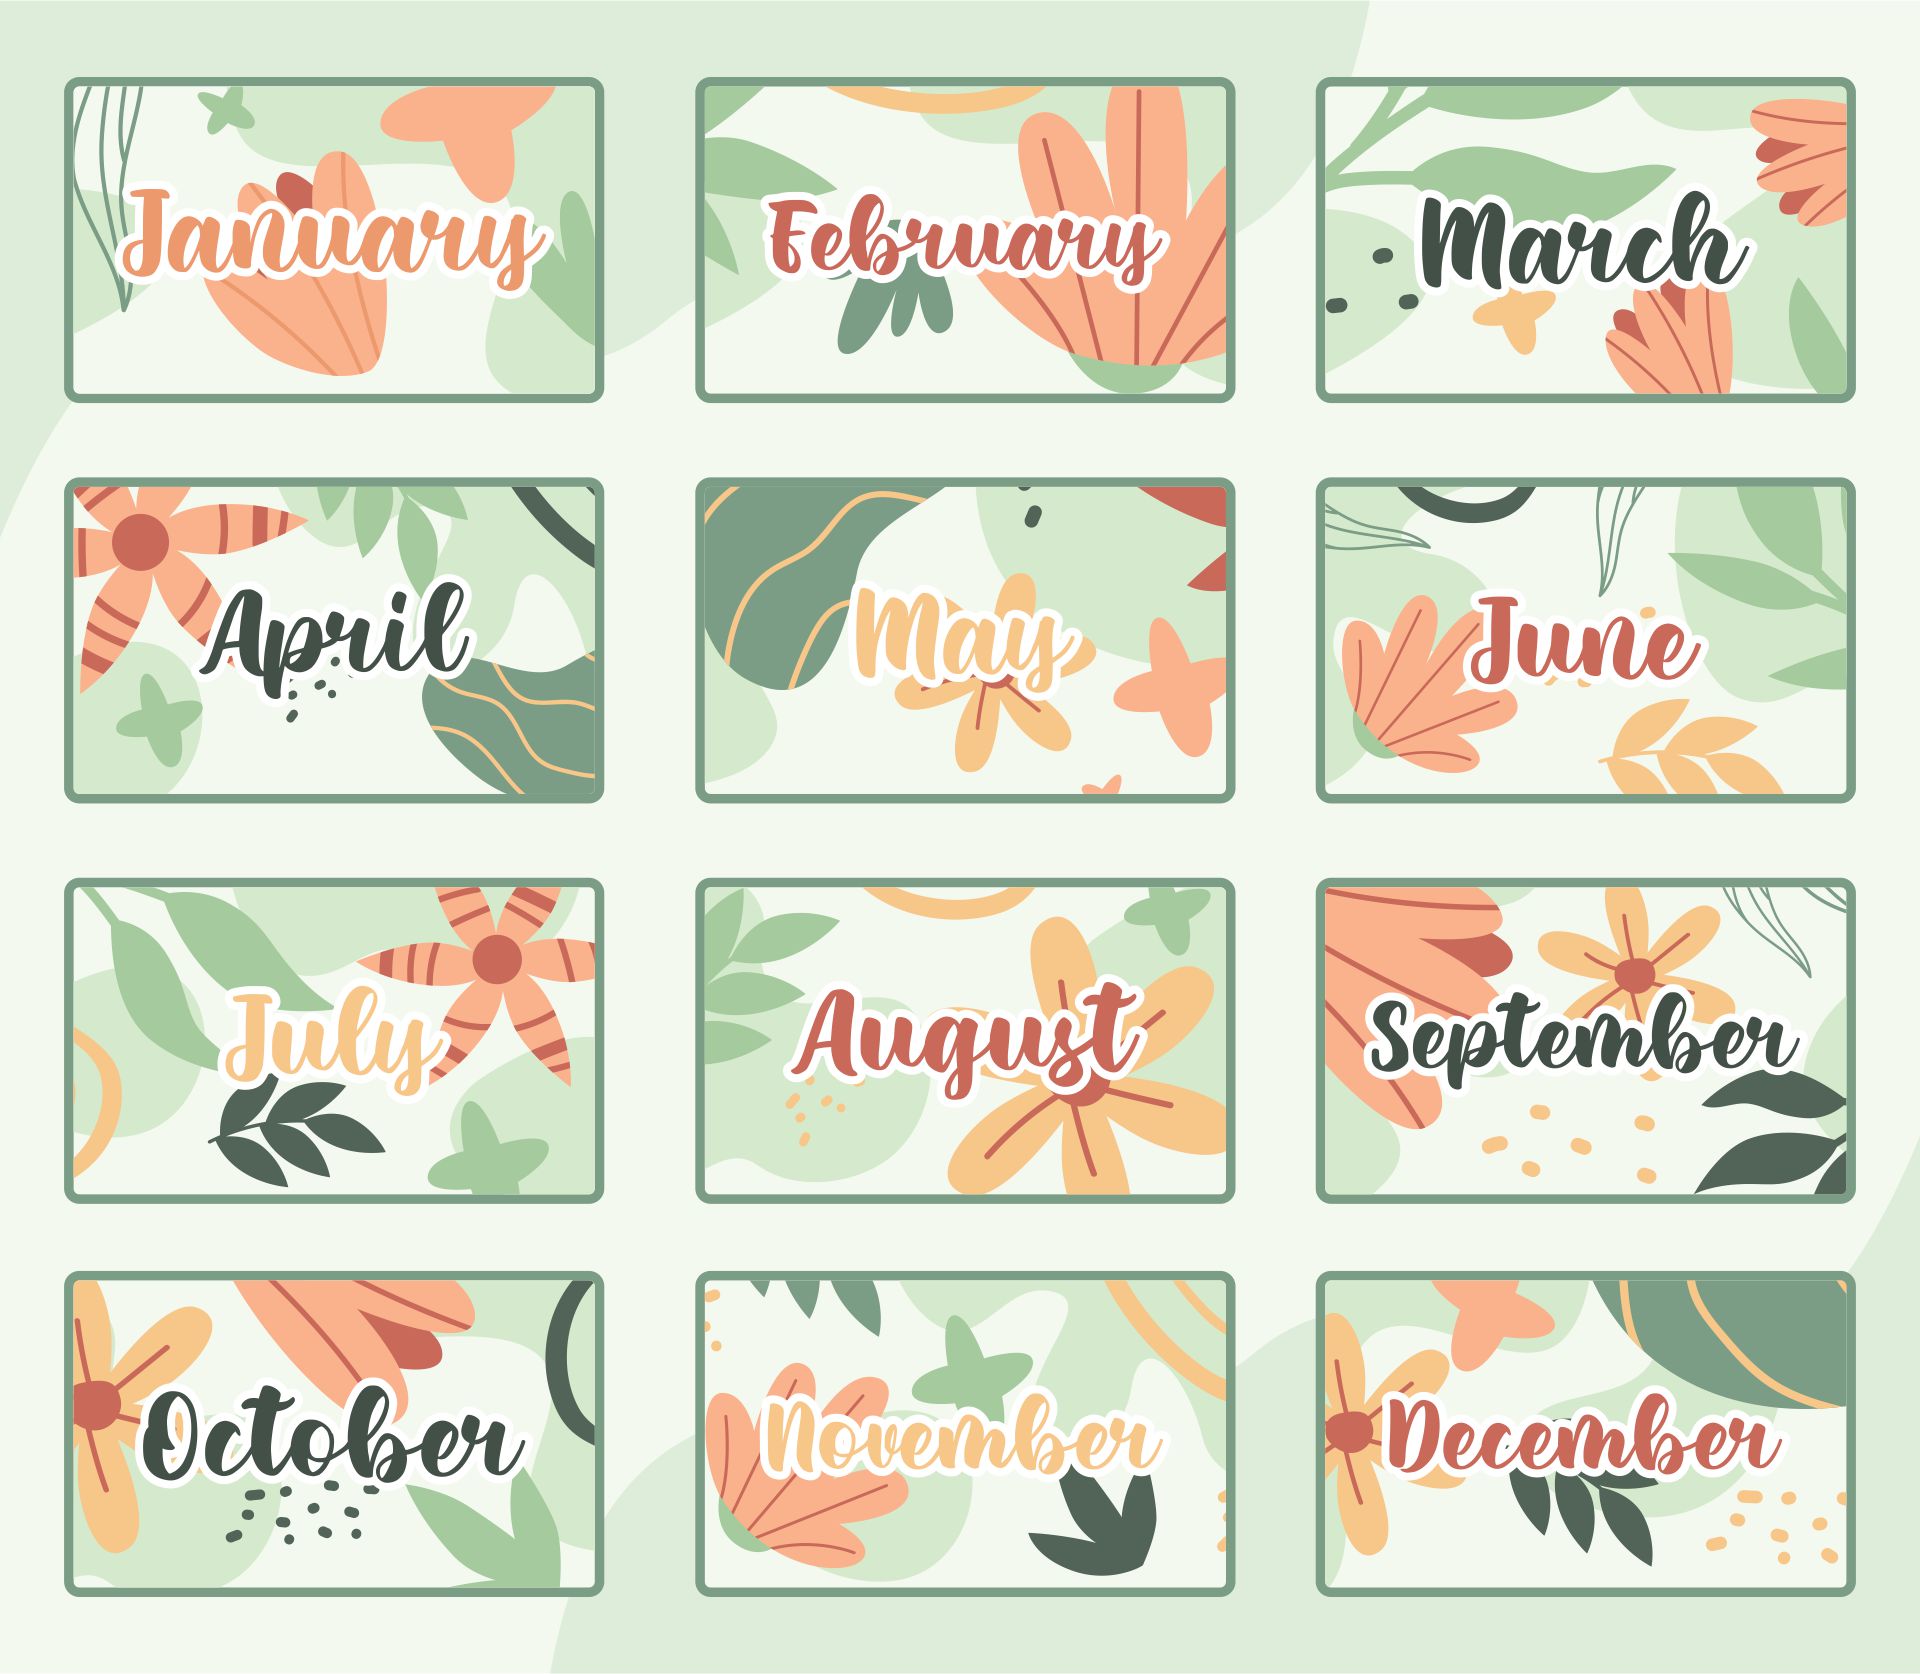 Calendar Months of the Year Cards